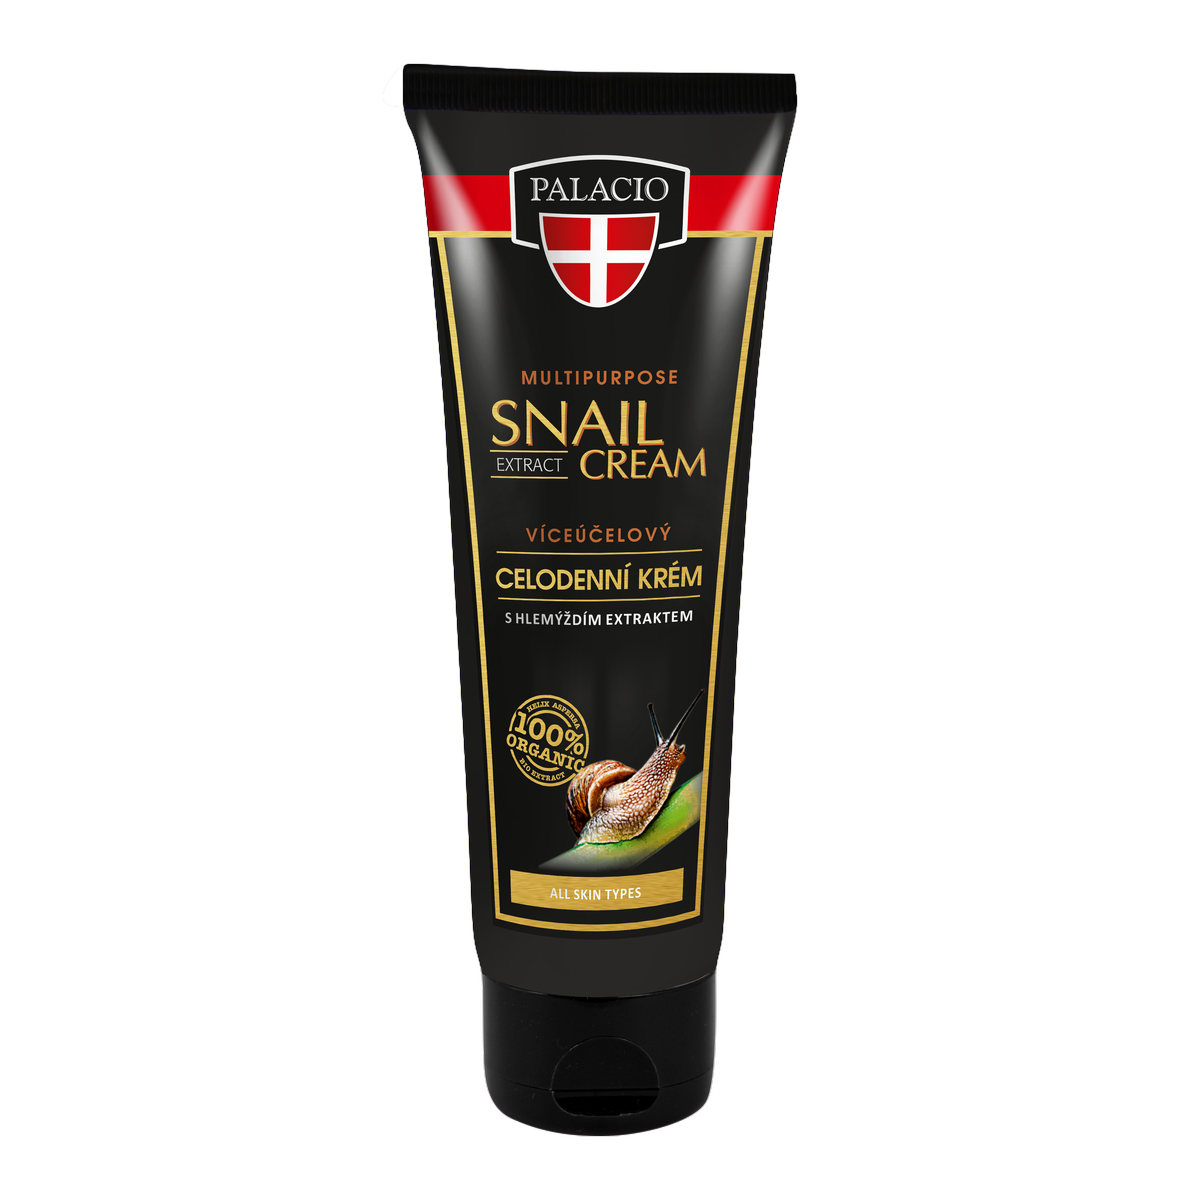 SNAIL EXTRACT Multipurpouse Cream 125ml P1305 ENG WEB 56